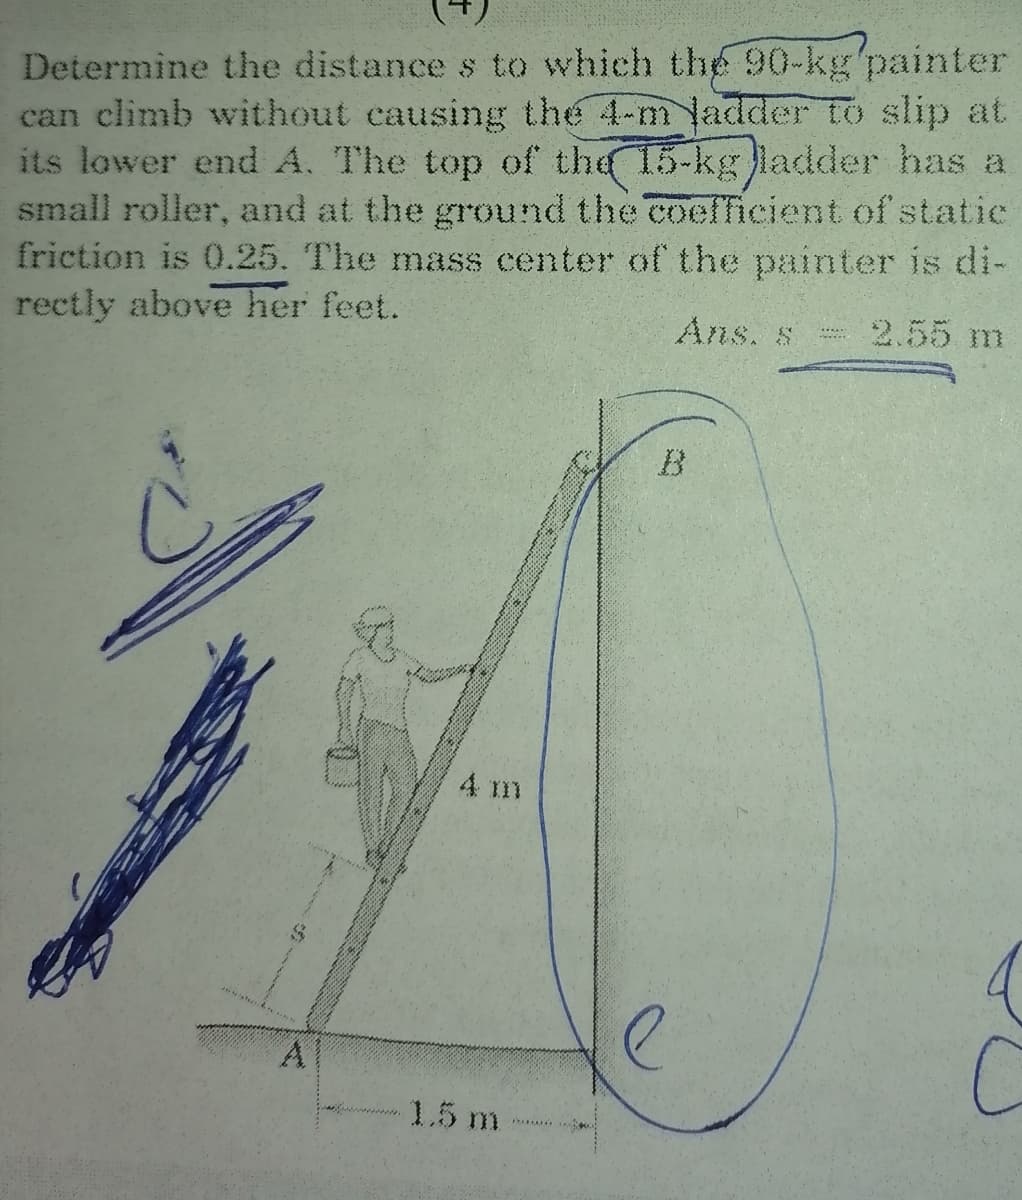 Determine the distance s to which the 90-kg'painter
can climb without causing the 4-m ladder to slip at
its lower end A. The top of the 15-kg ladder has a
small roller, and at the ground the coefficient of statie
friction is 0.25. The mass center of the painter is di-
rectly above her feet.
Ans. s
2.55 m
4 m
A
1.5 m
